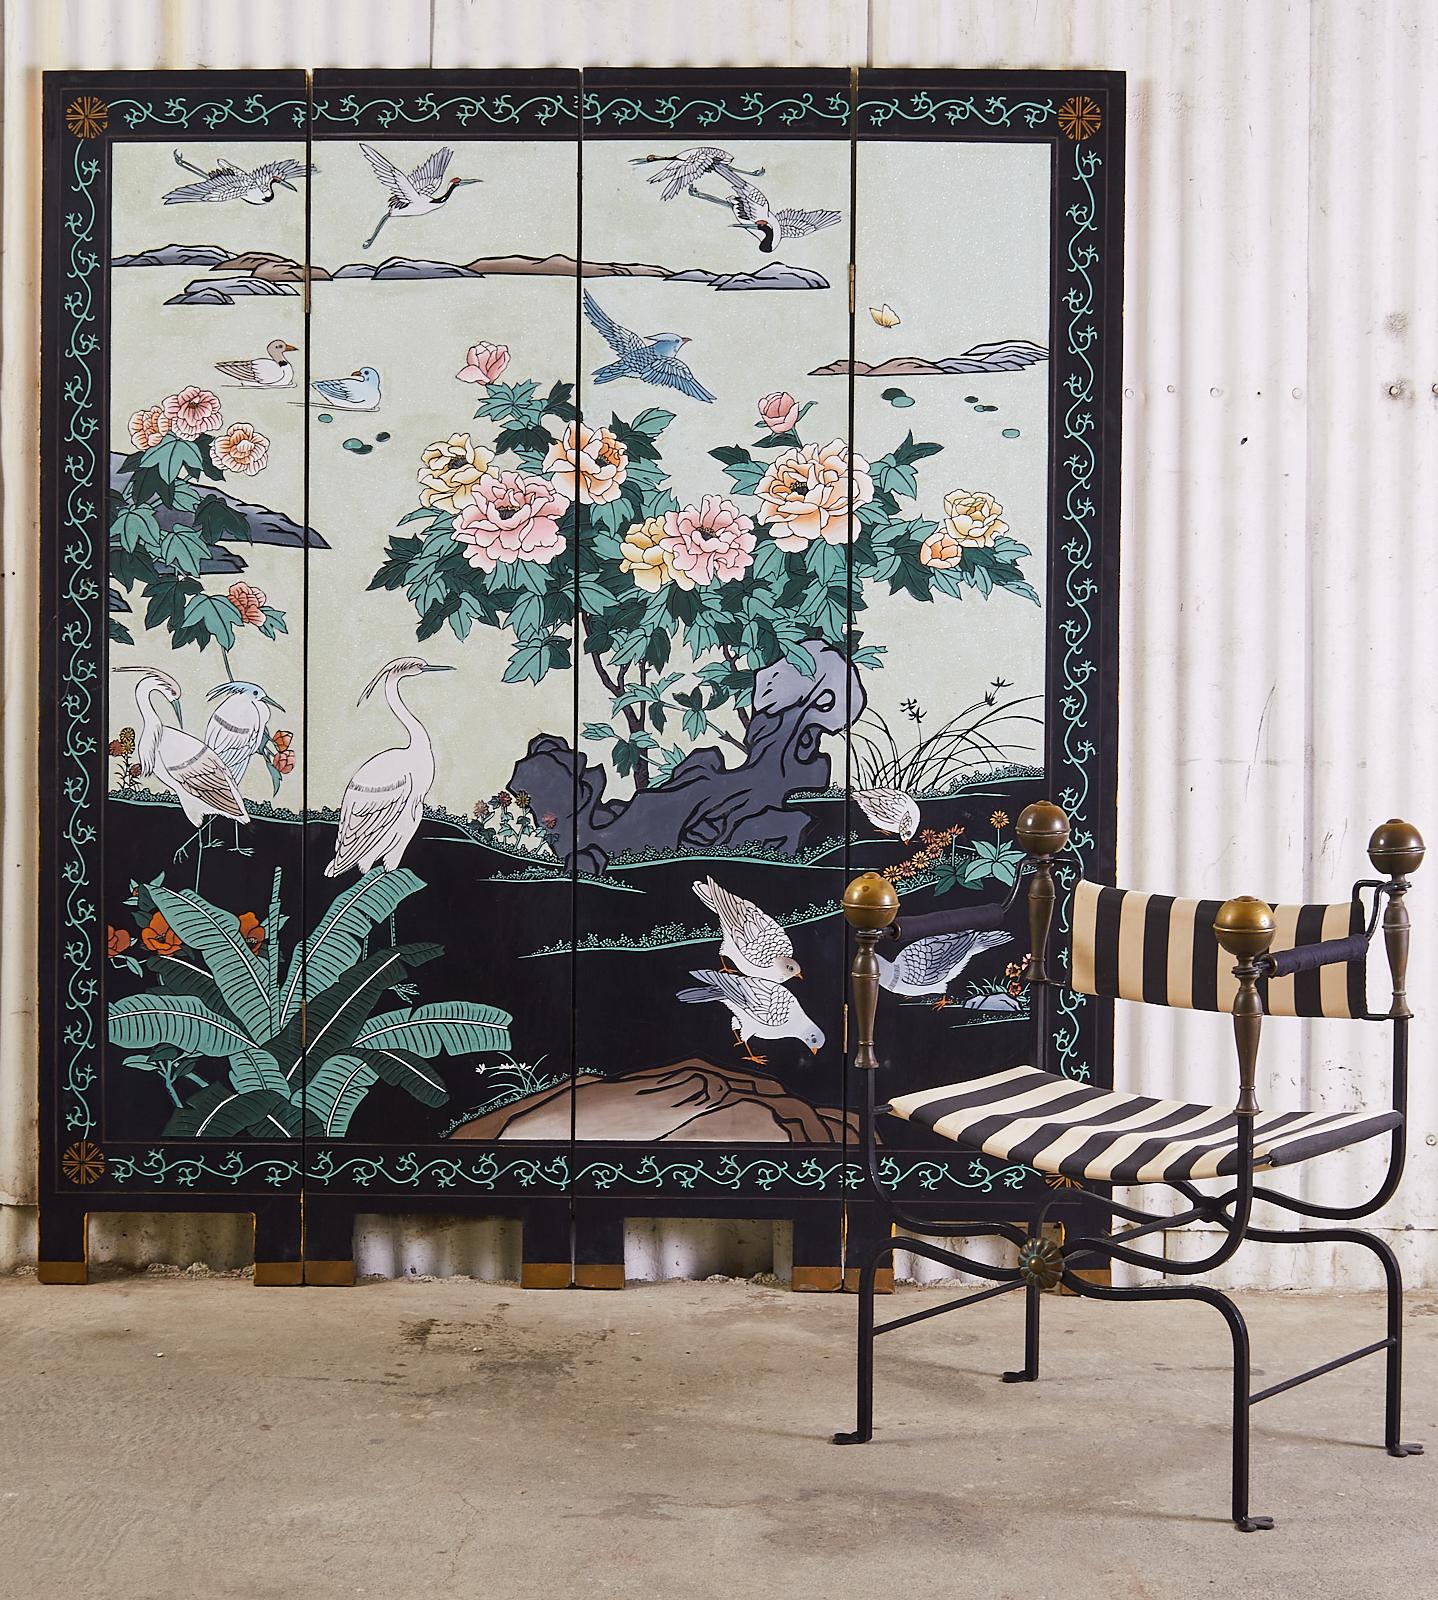 Imposing Chinese export four-panel lacquered coromandel screen depicting a flora and fauna landscape with a dramatic pearlescent white sand background. Rare mint green foliage and white cranes stand out boldly against the black and white ground. The